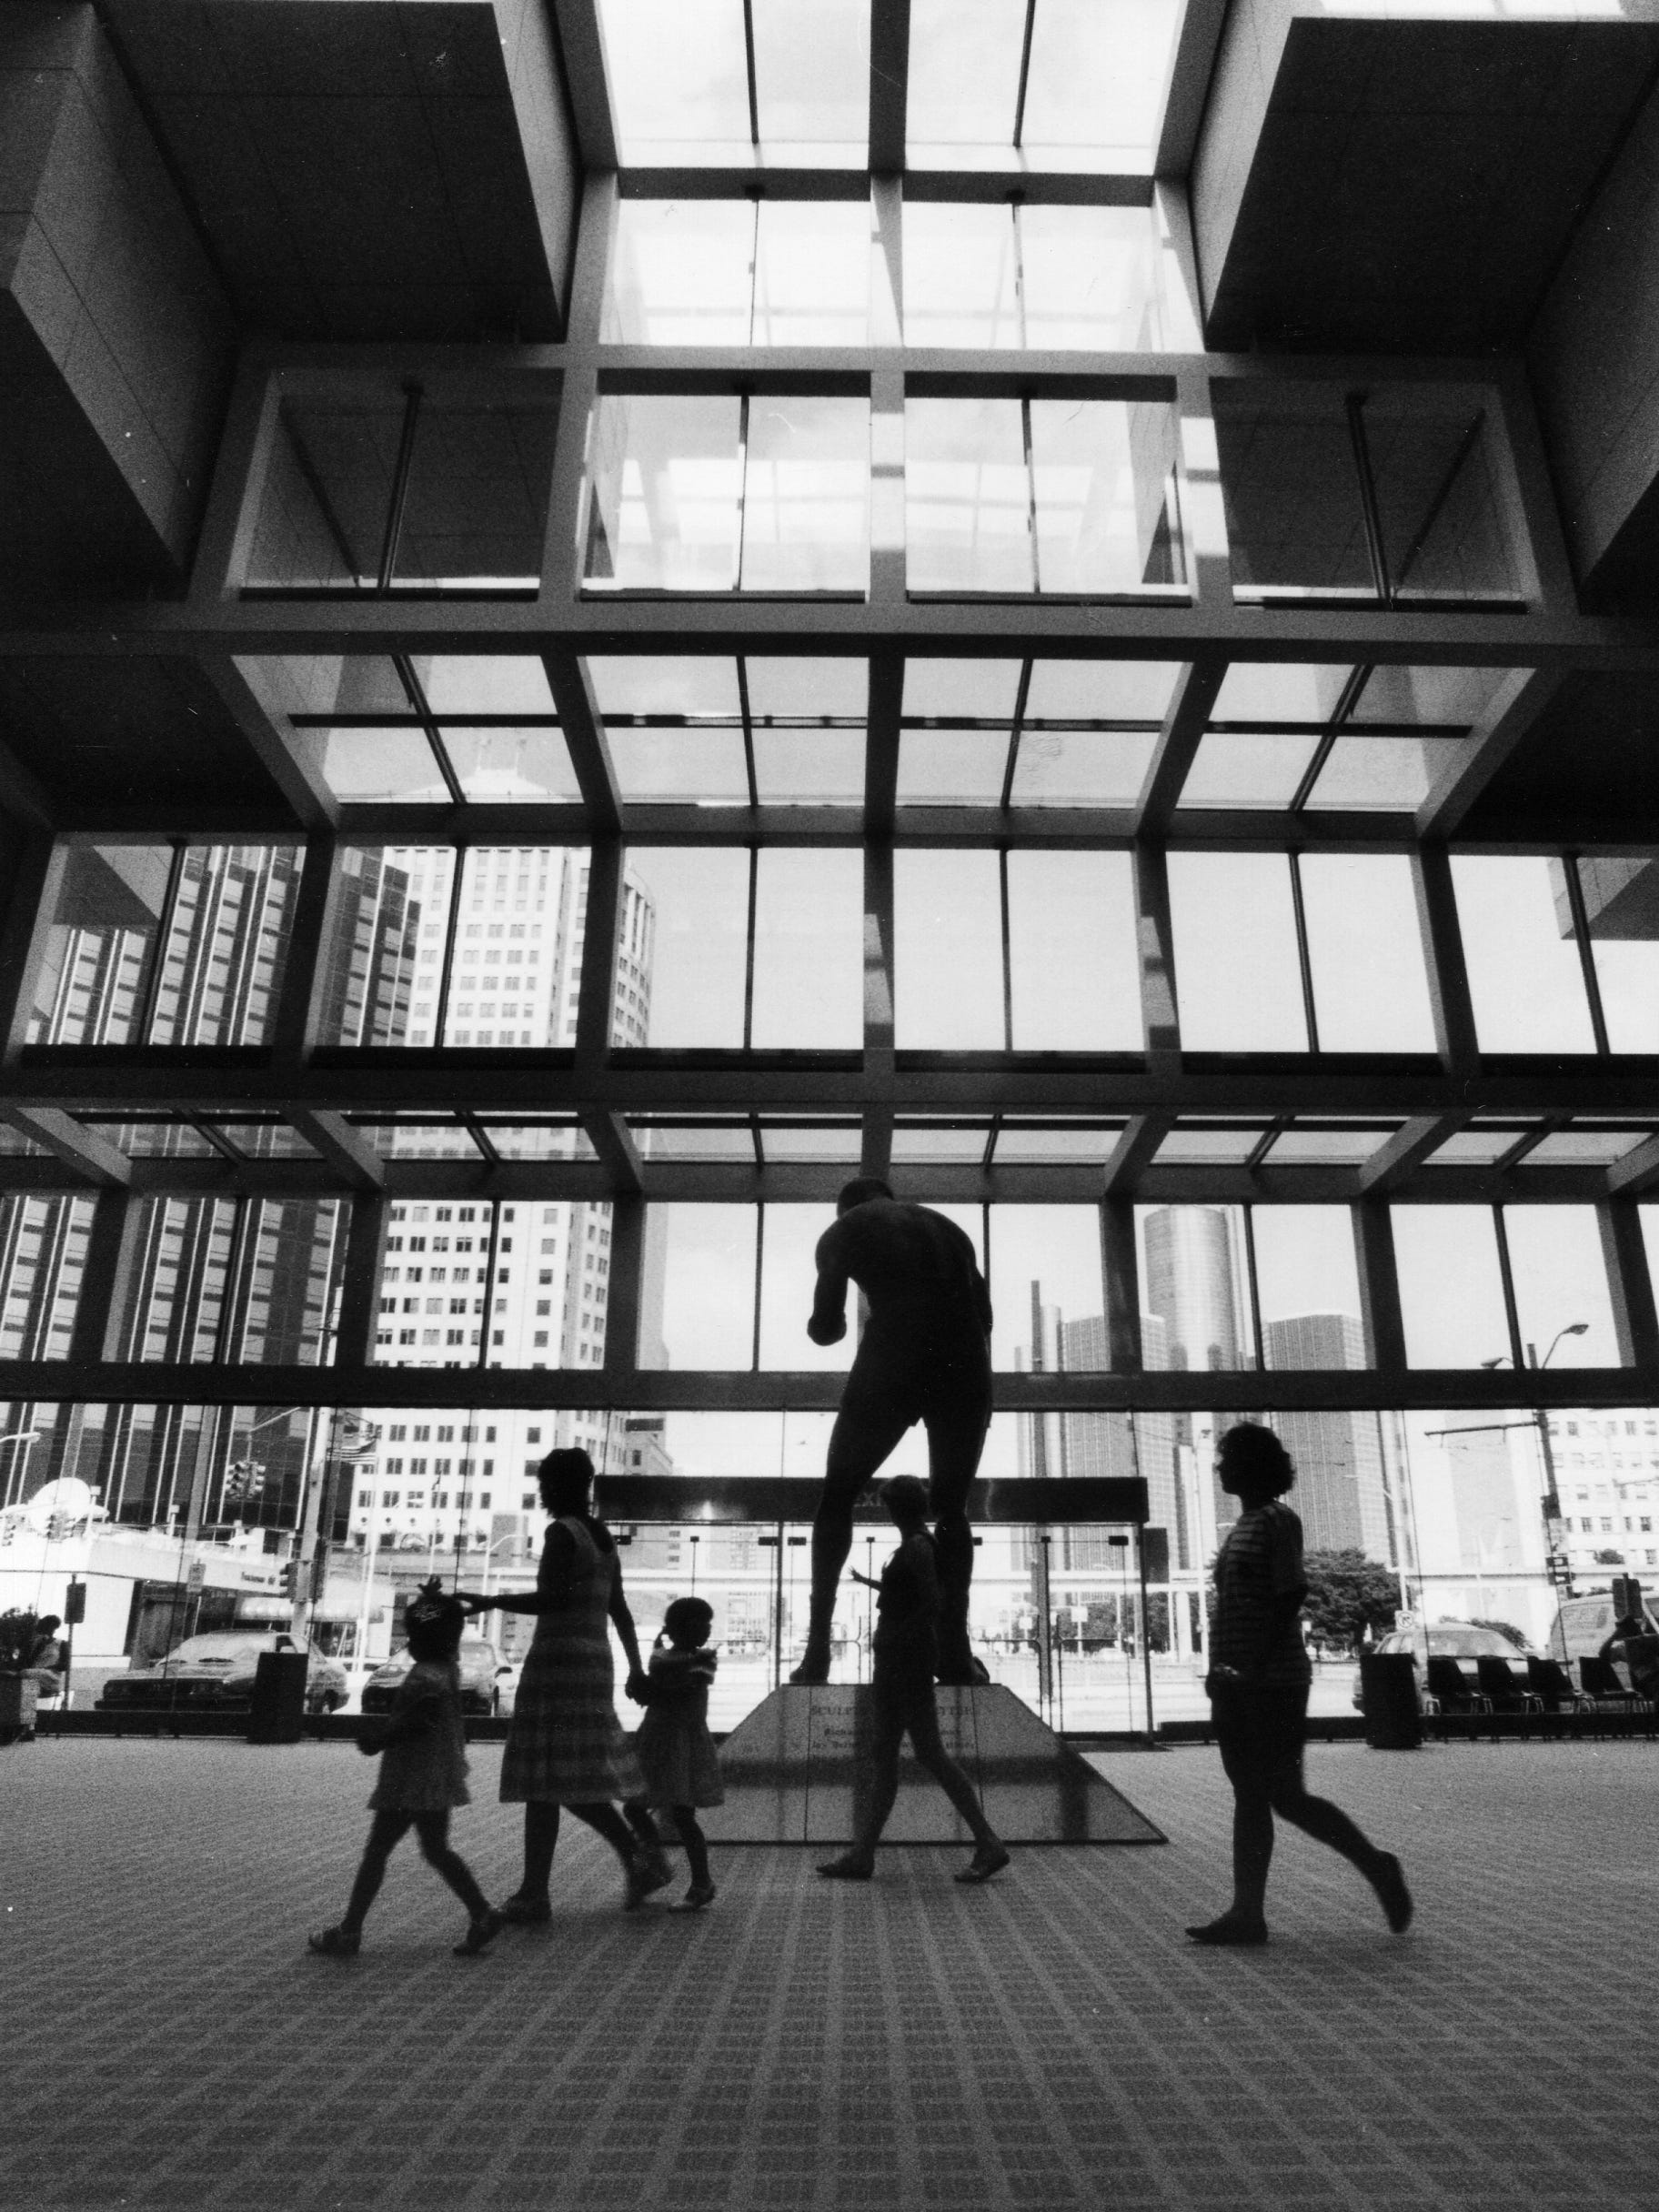 People walk past the statue of Joe Louis near the entrance to Cobo Center on Aug. 24, 1990. The center was expanded in the 1980s.